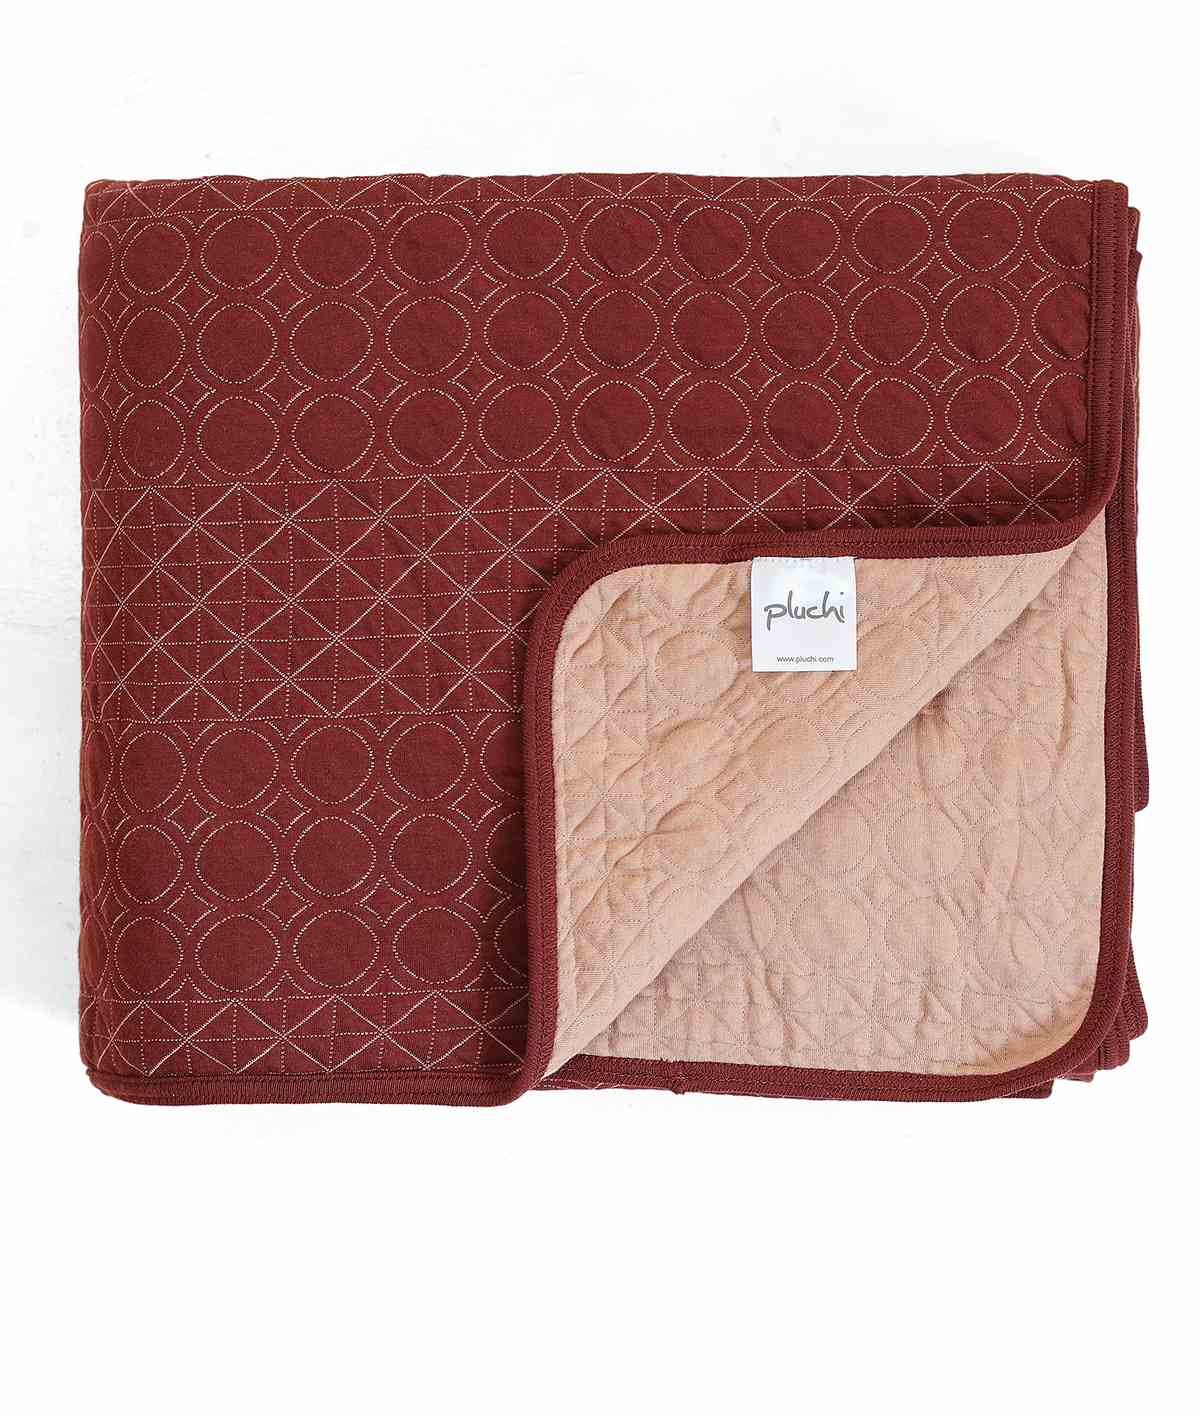 Double bed quilted blanket